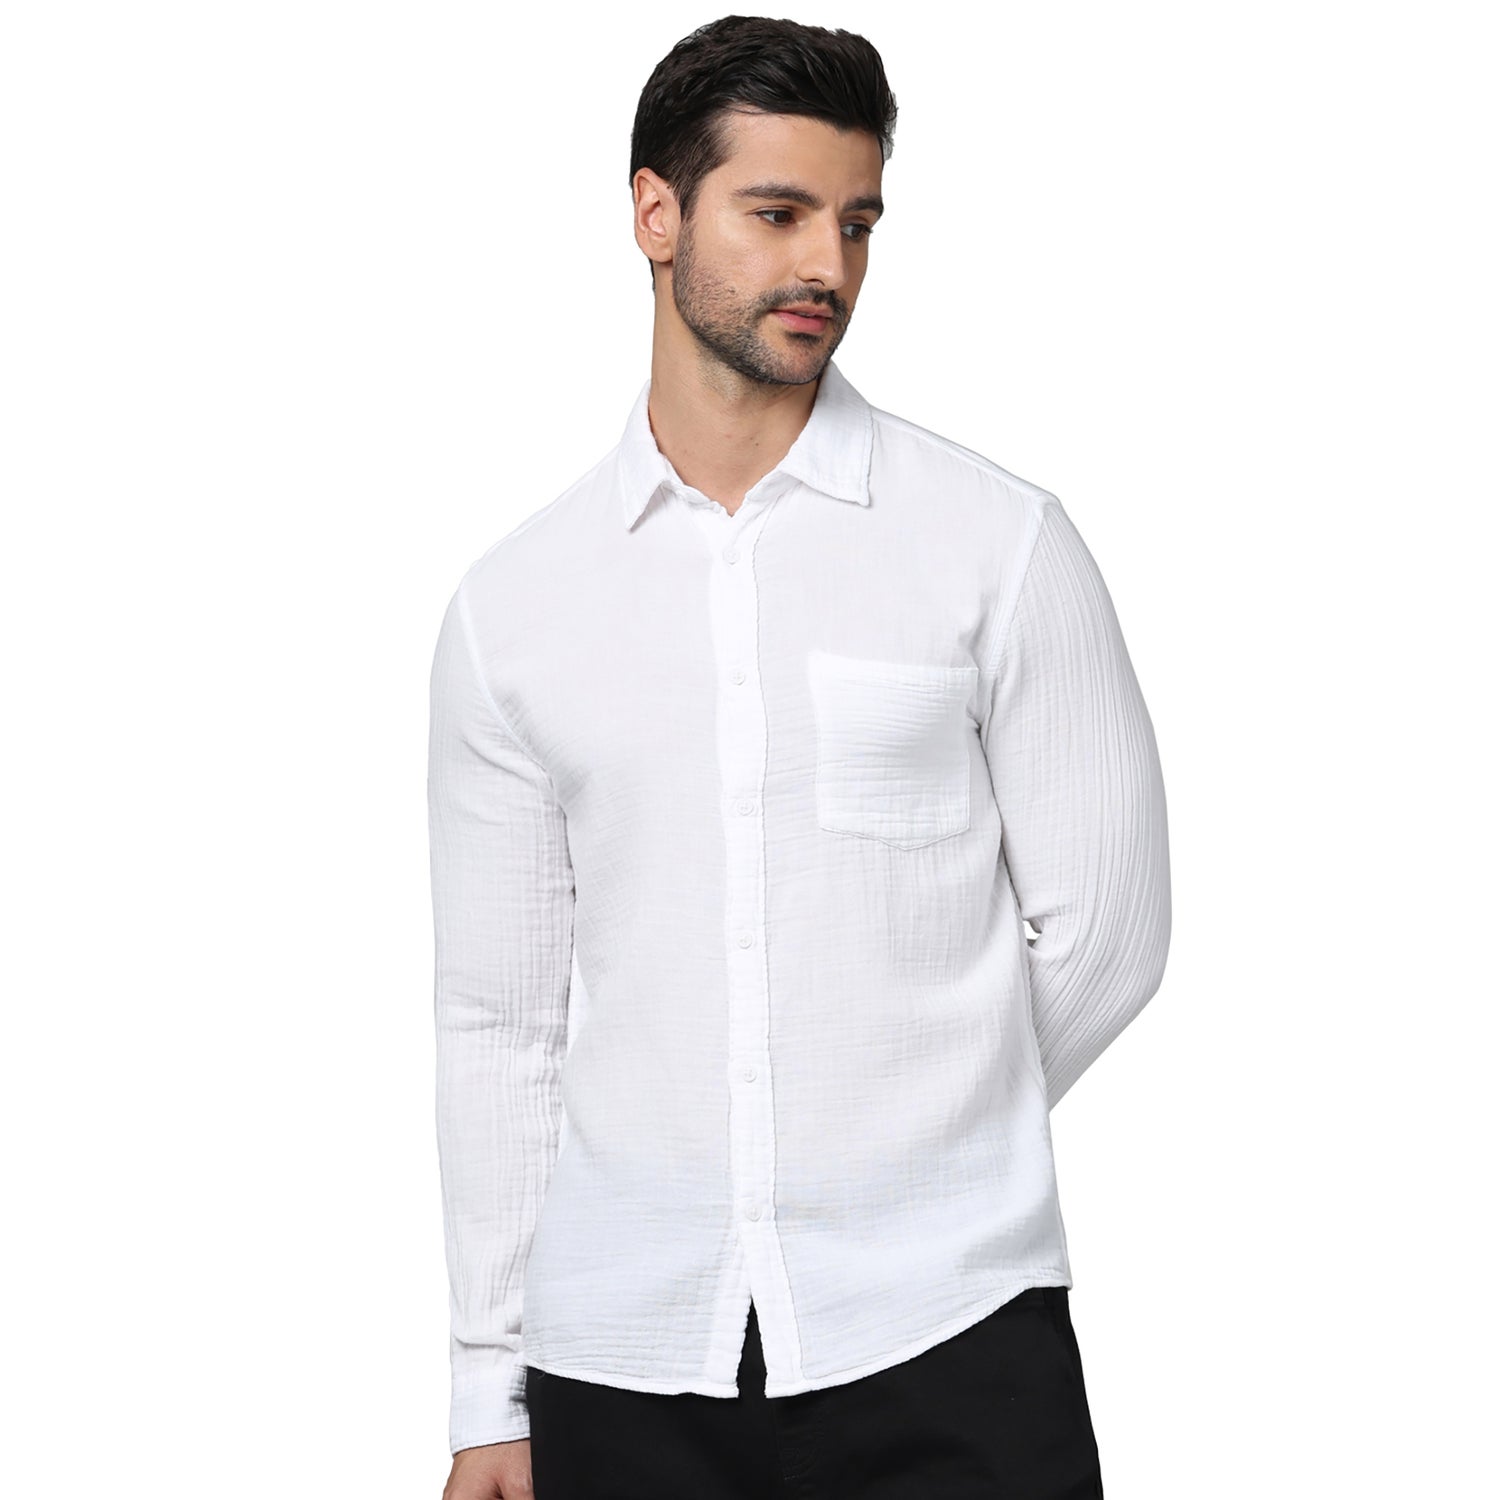 Men's White Spread Collar Solid Regular Fit Cotton Double Cloth Casual Shirts (GAGAZCO)